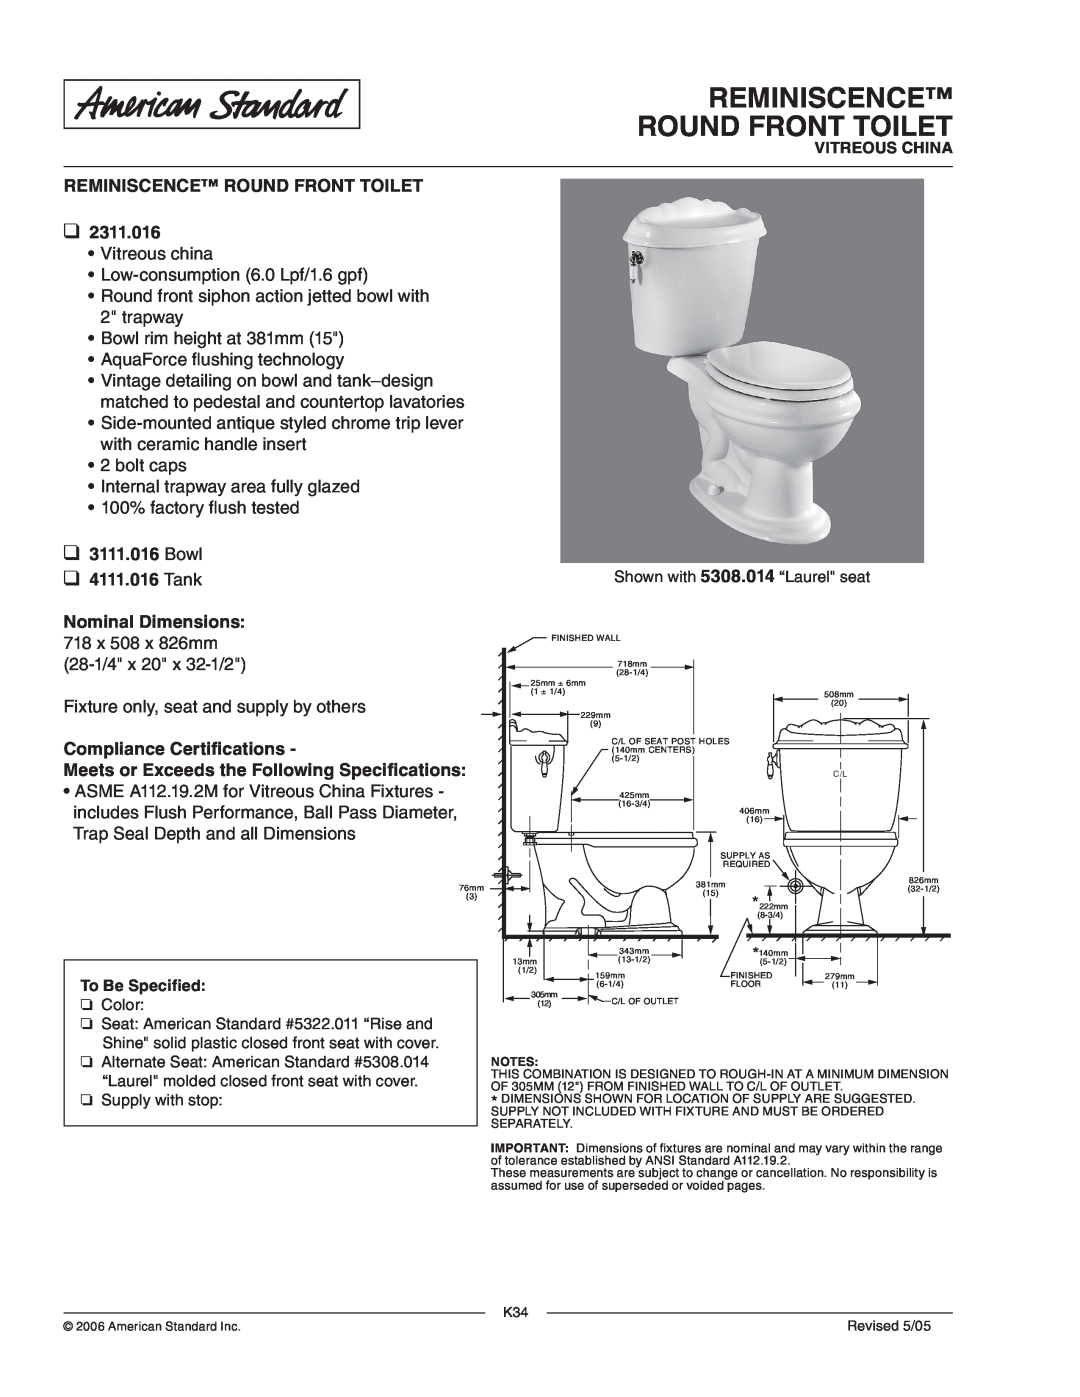 American Standard 3111.016 dimensions Reminiscence Round Front Toilet, Bowl 4111.016 Tank Nominal Dimensions 